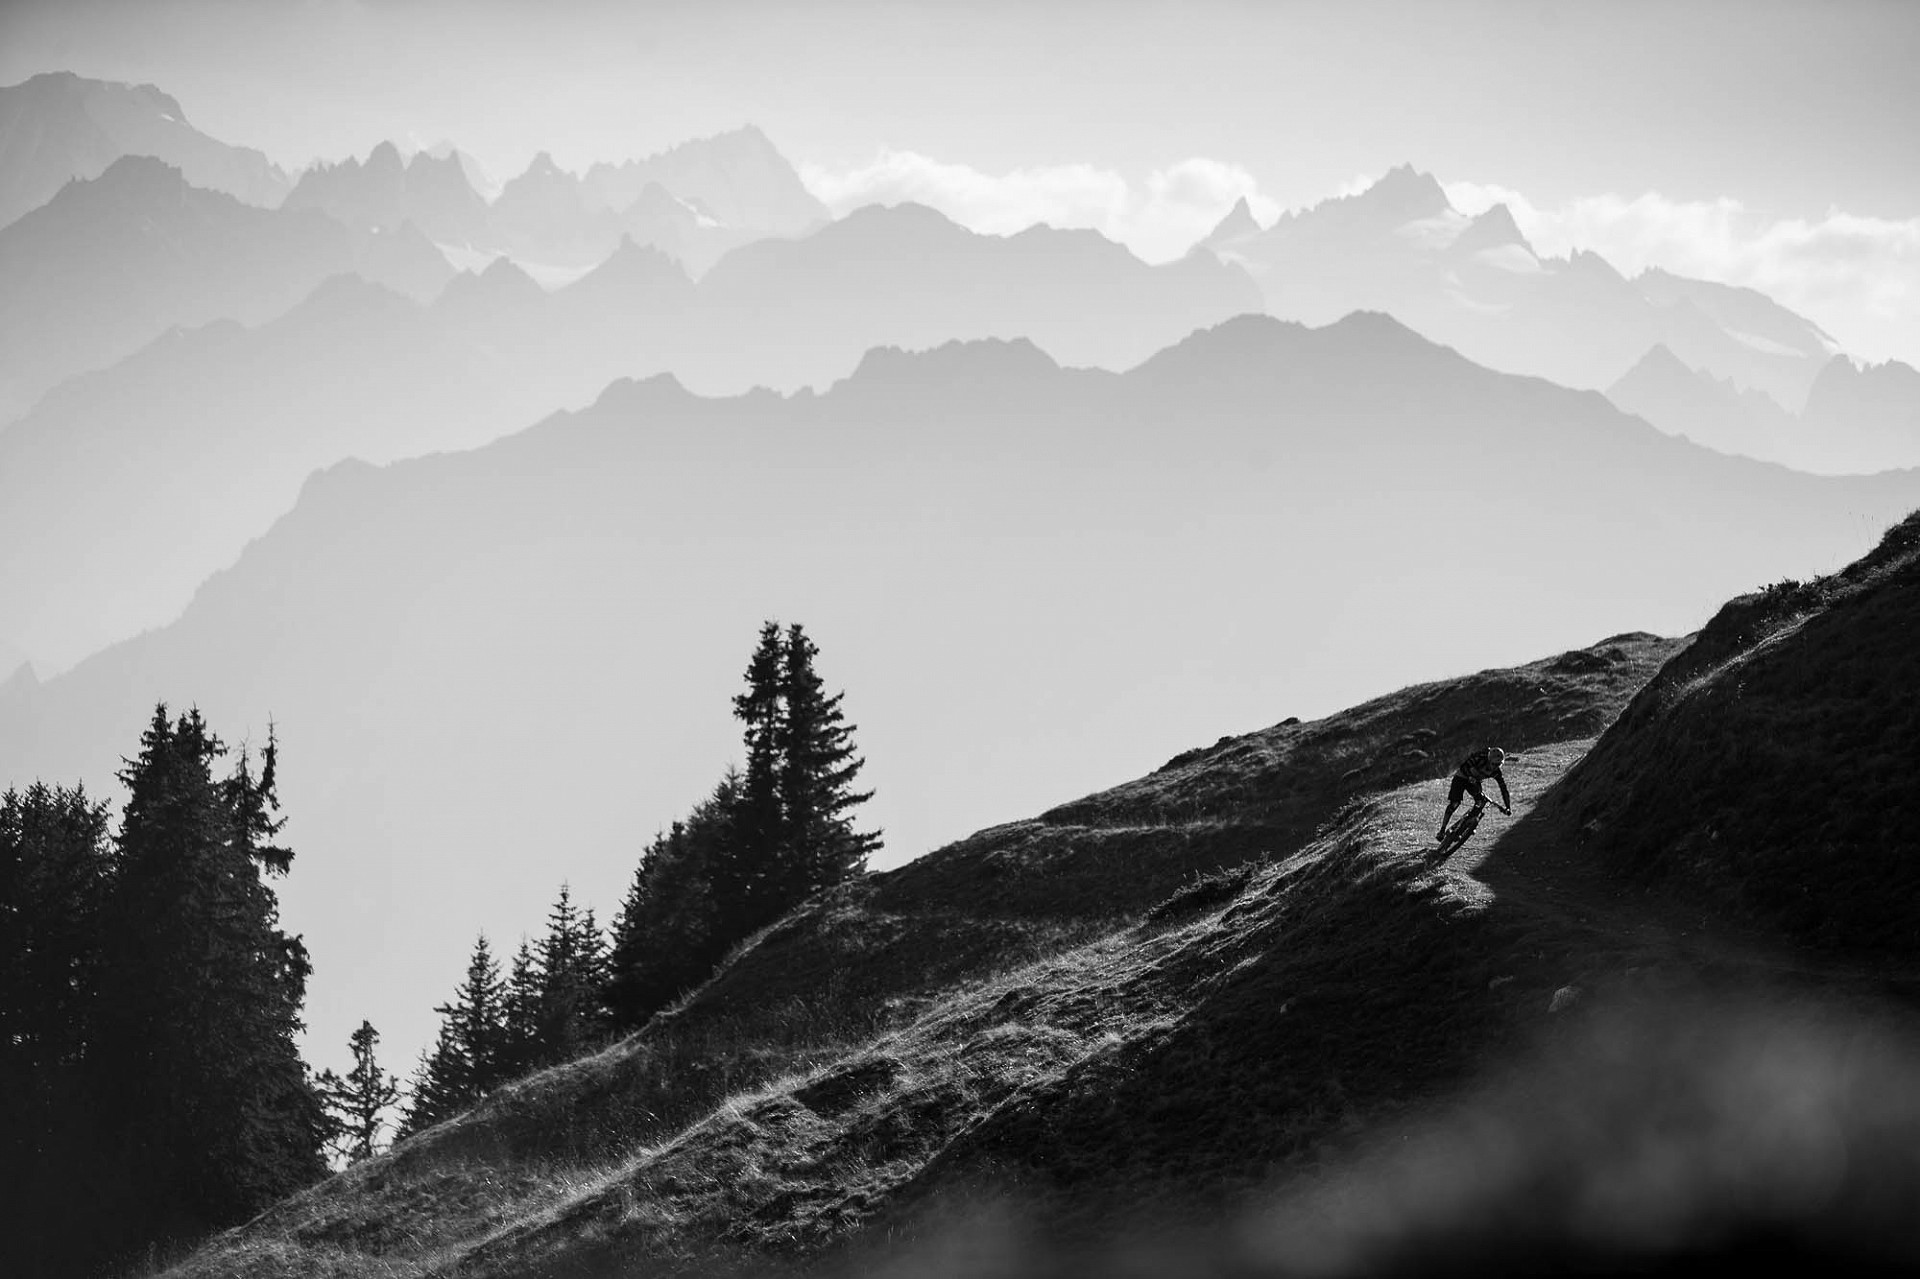 Ludovic May, Verbier